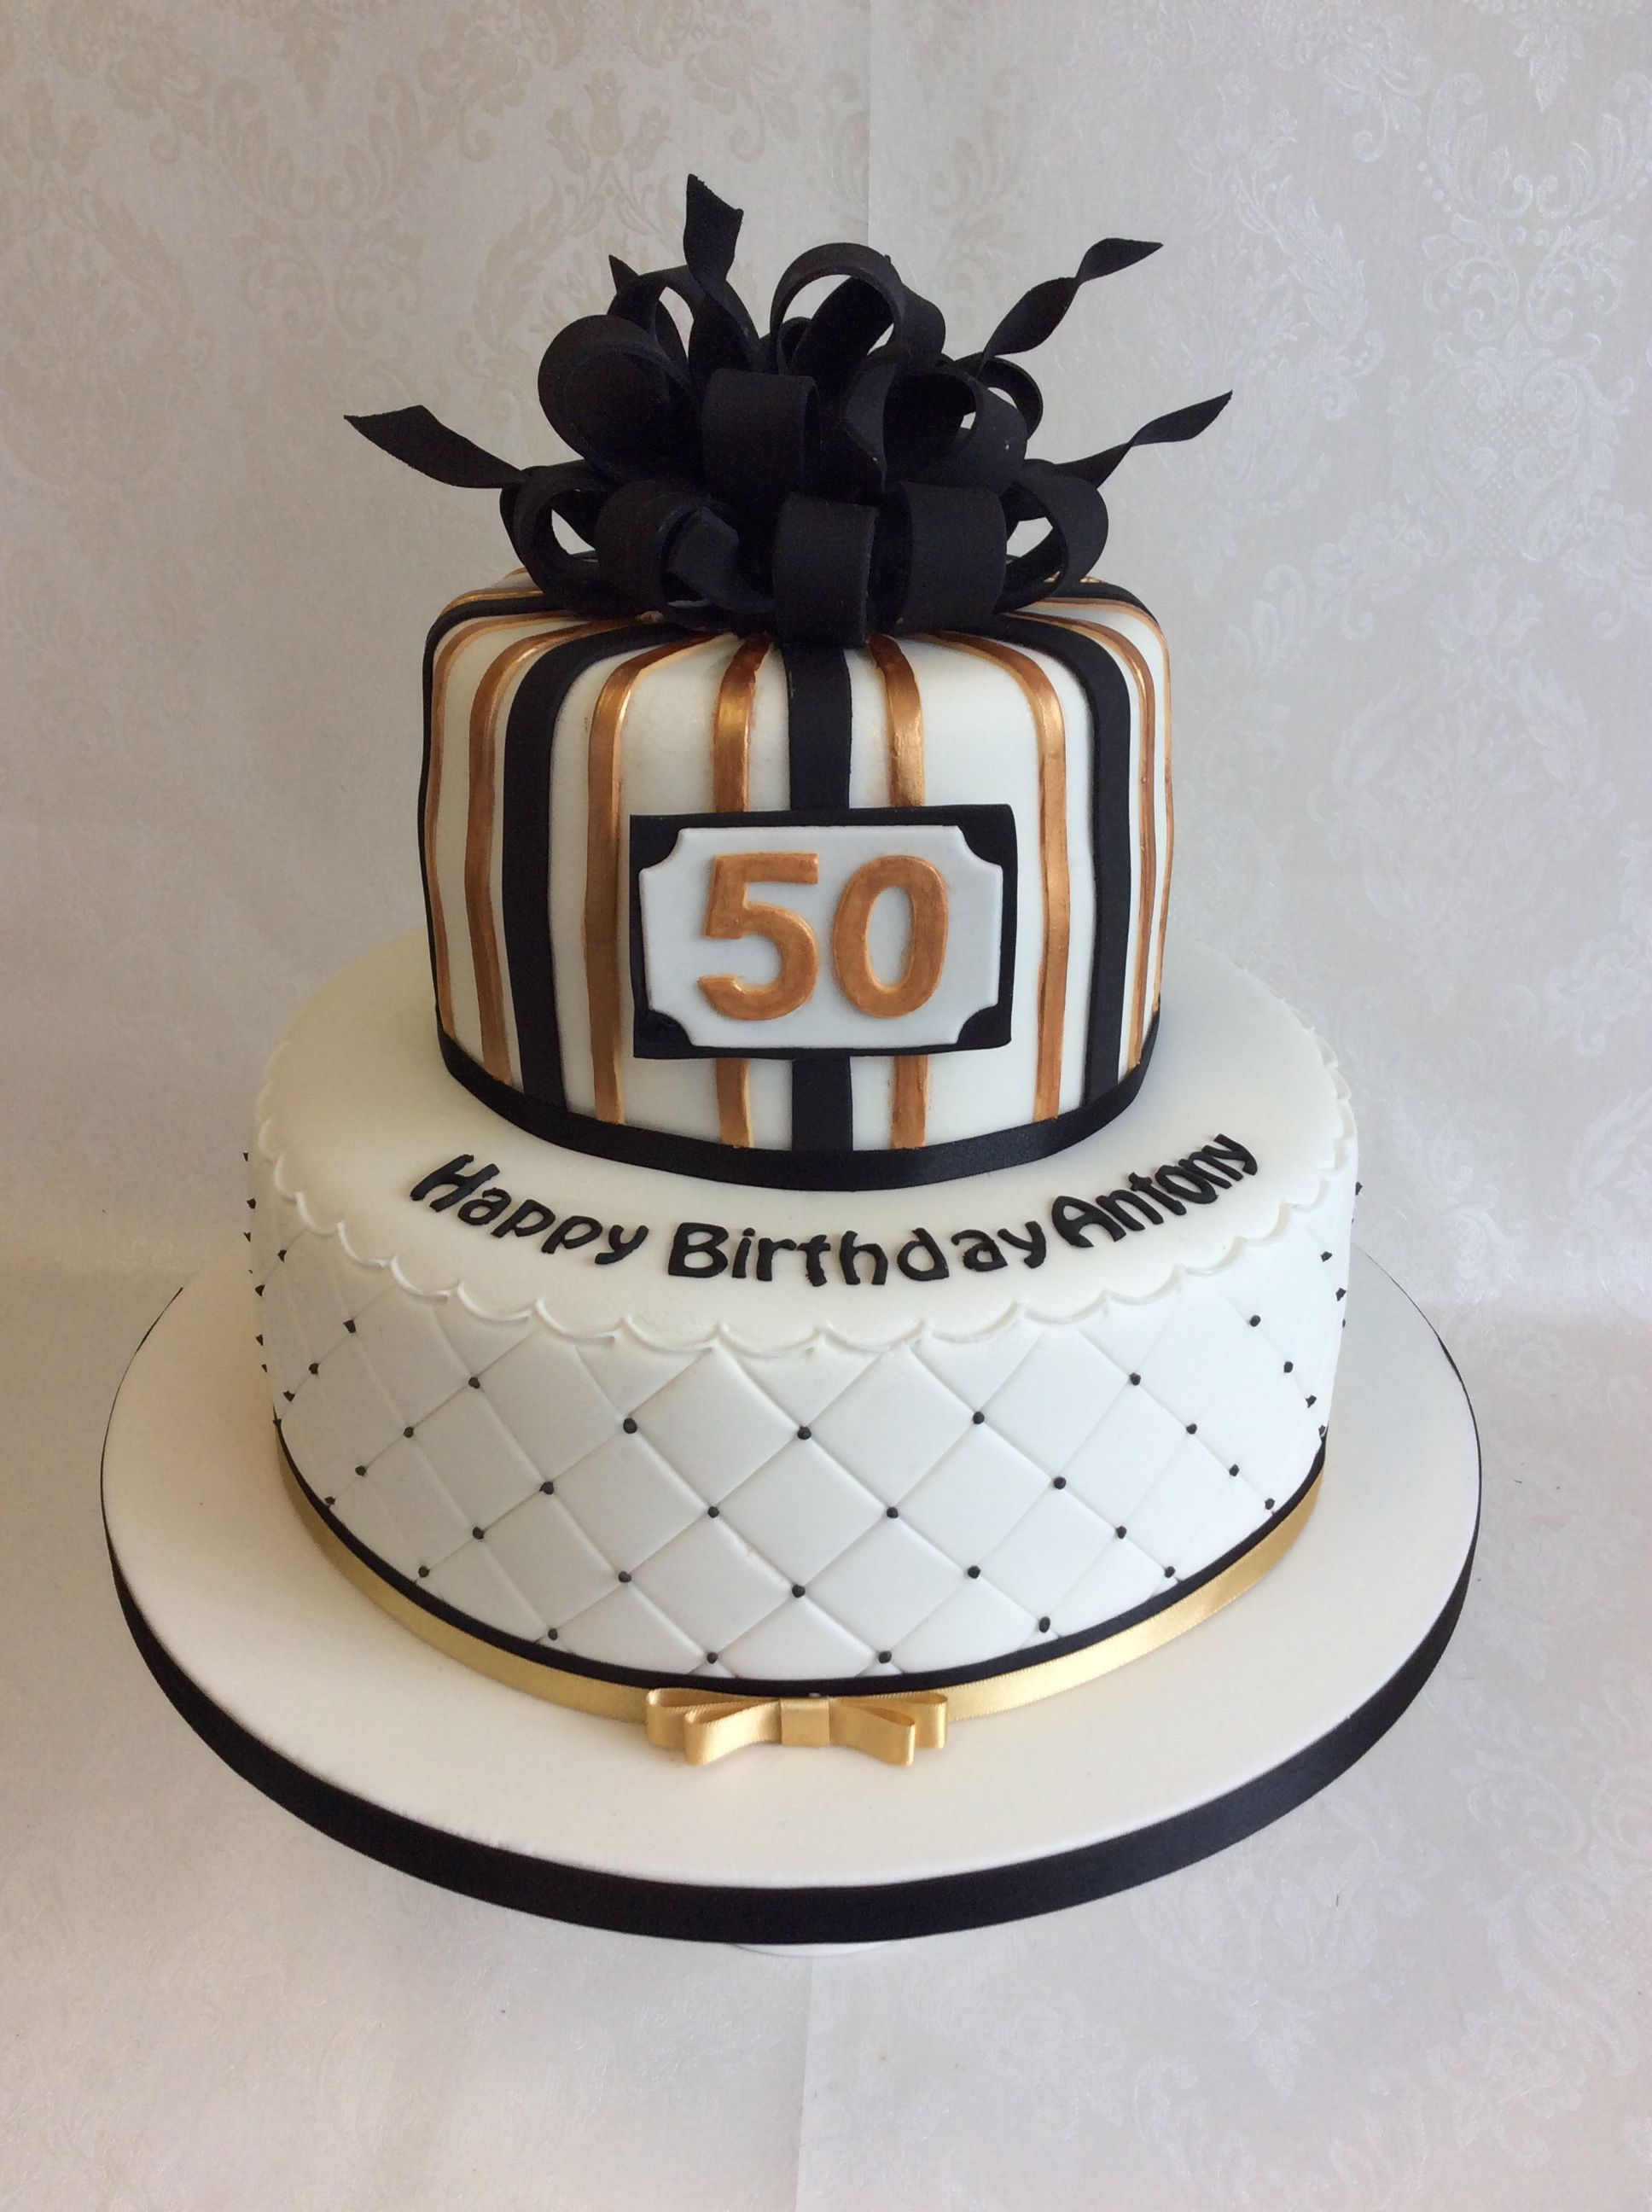 2 Tier Birthday Cakes Parcel Style Top Tier For This 2 Tier Black And Gold Themed Birthday